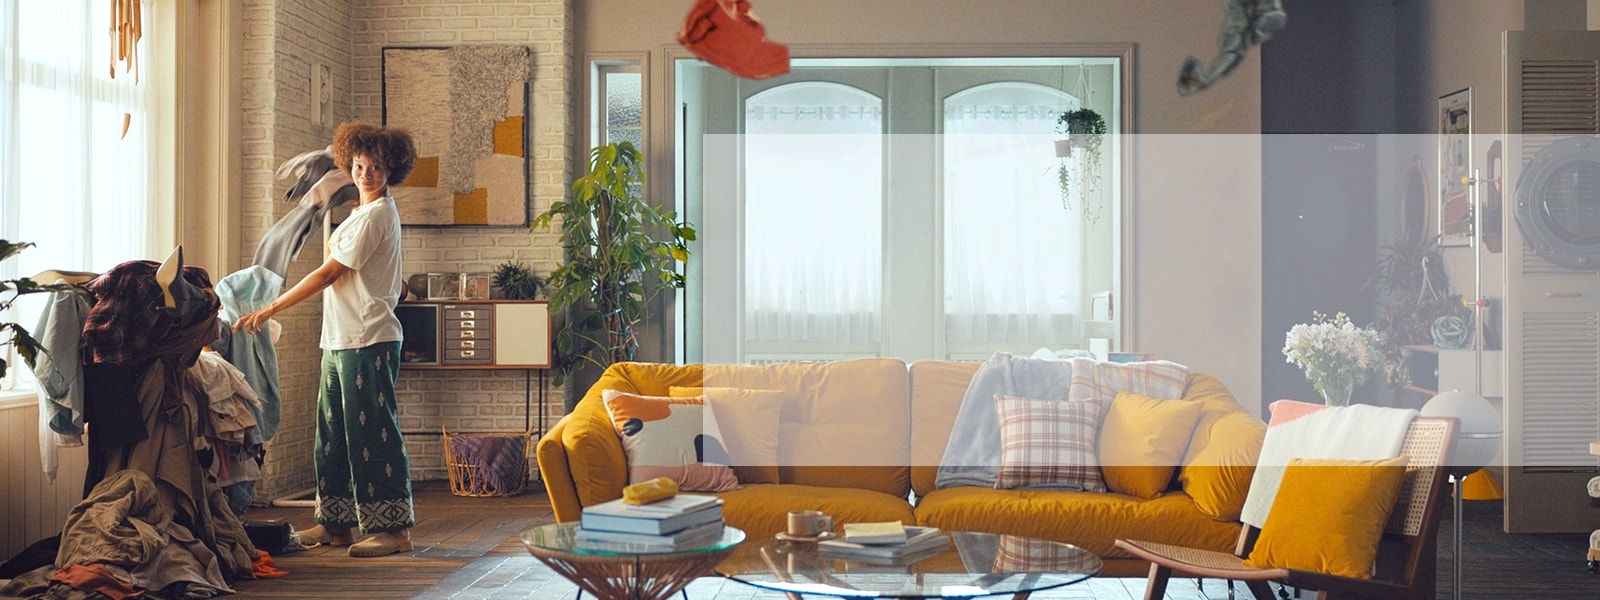 The key message for the LG Electronics' Healthy Home Solutions branding campaign is 'Healthy Changes Start at Home'